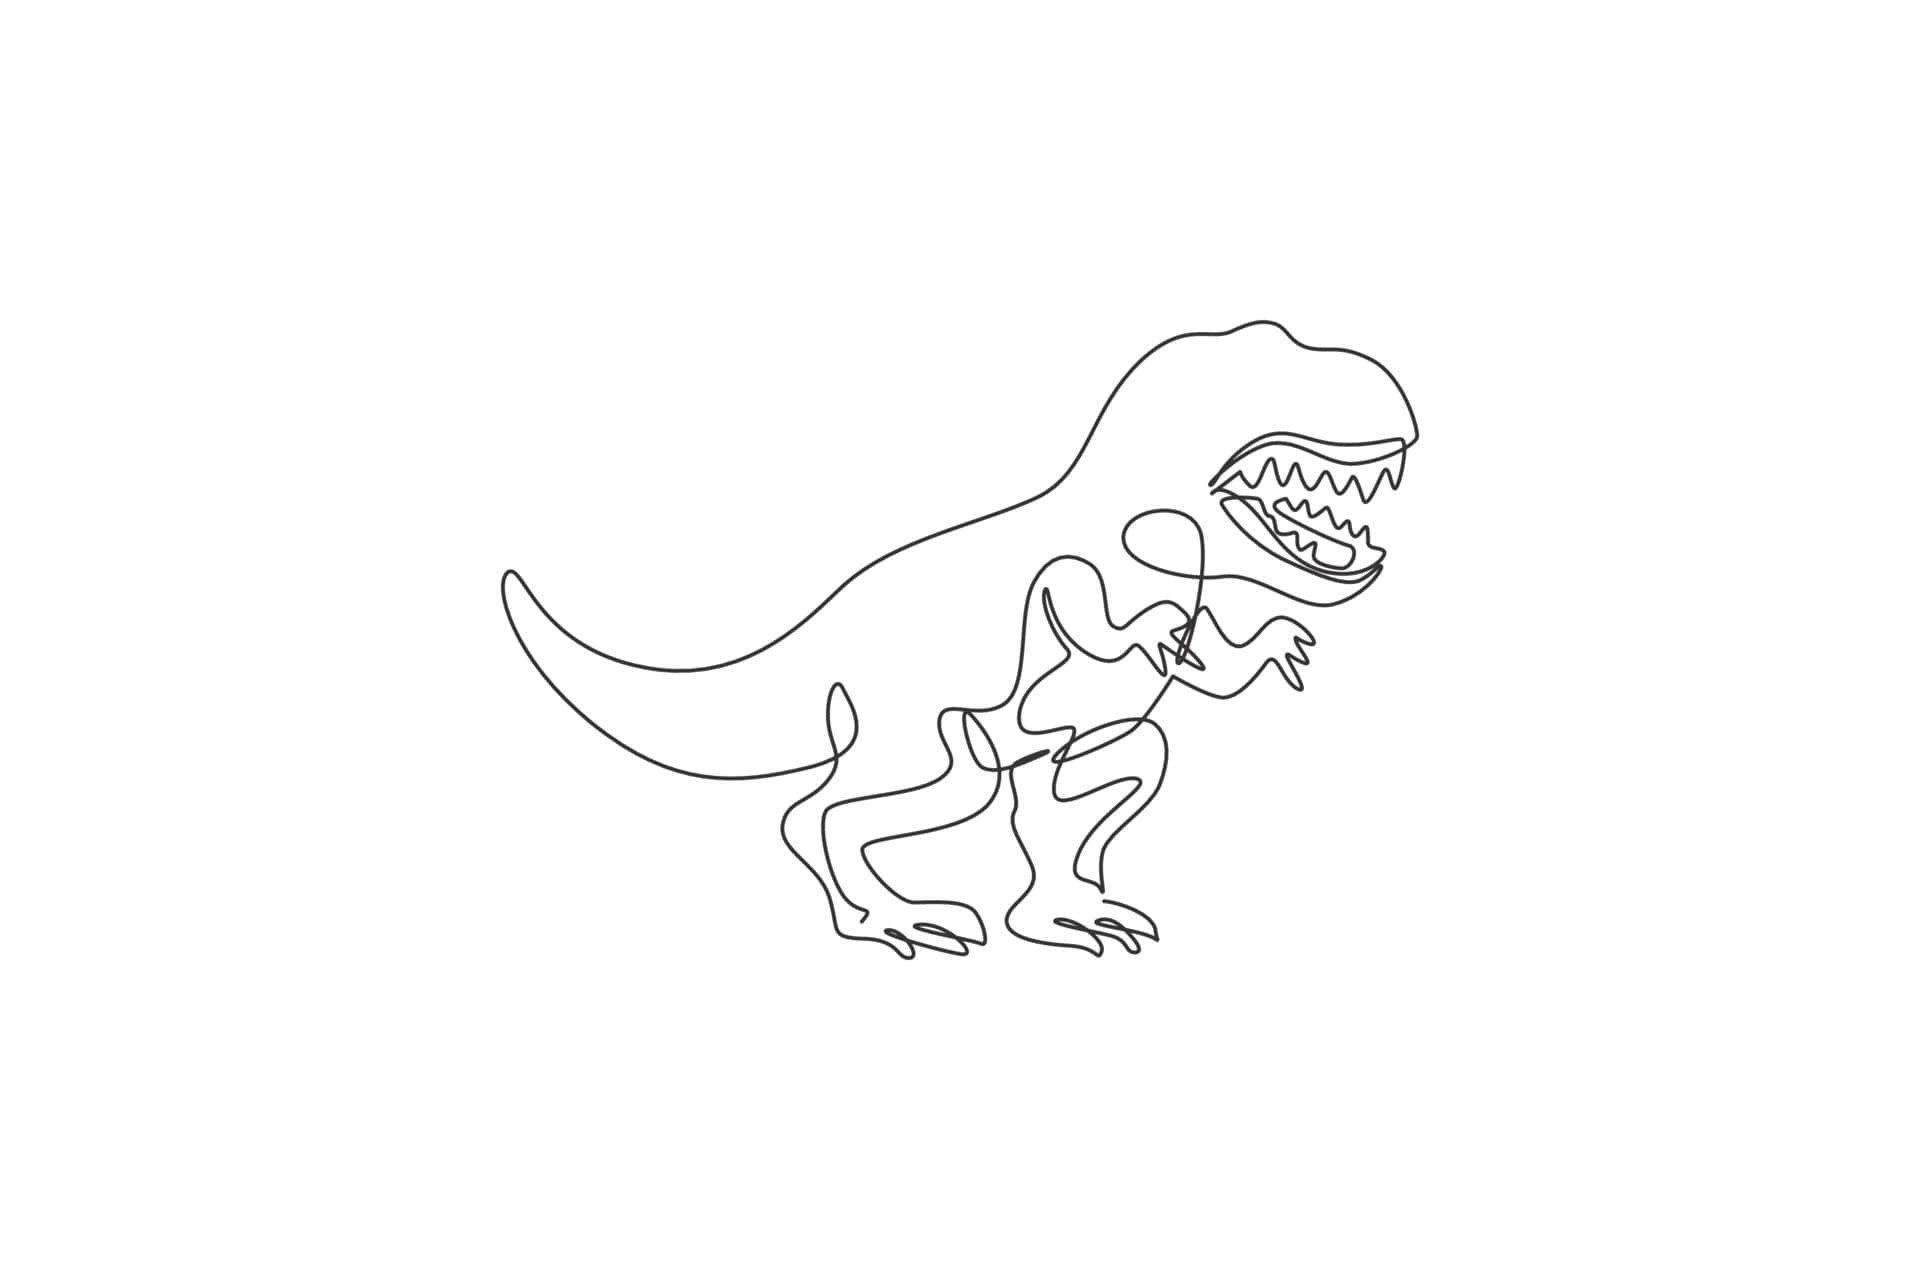 A T - Rex Drawing On A White Background